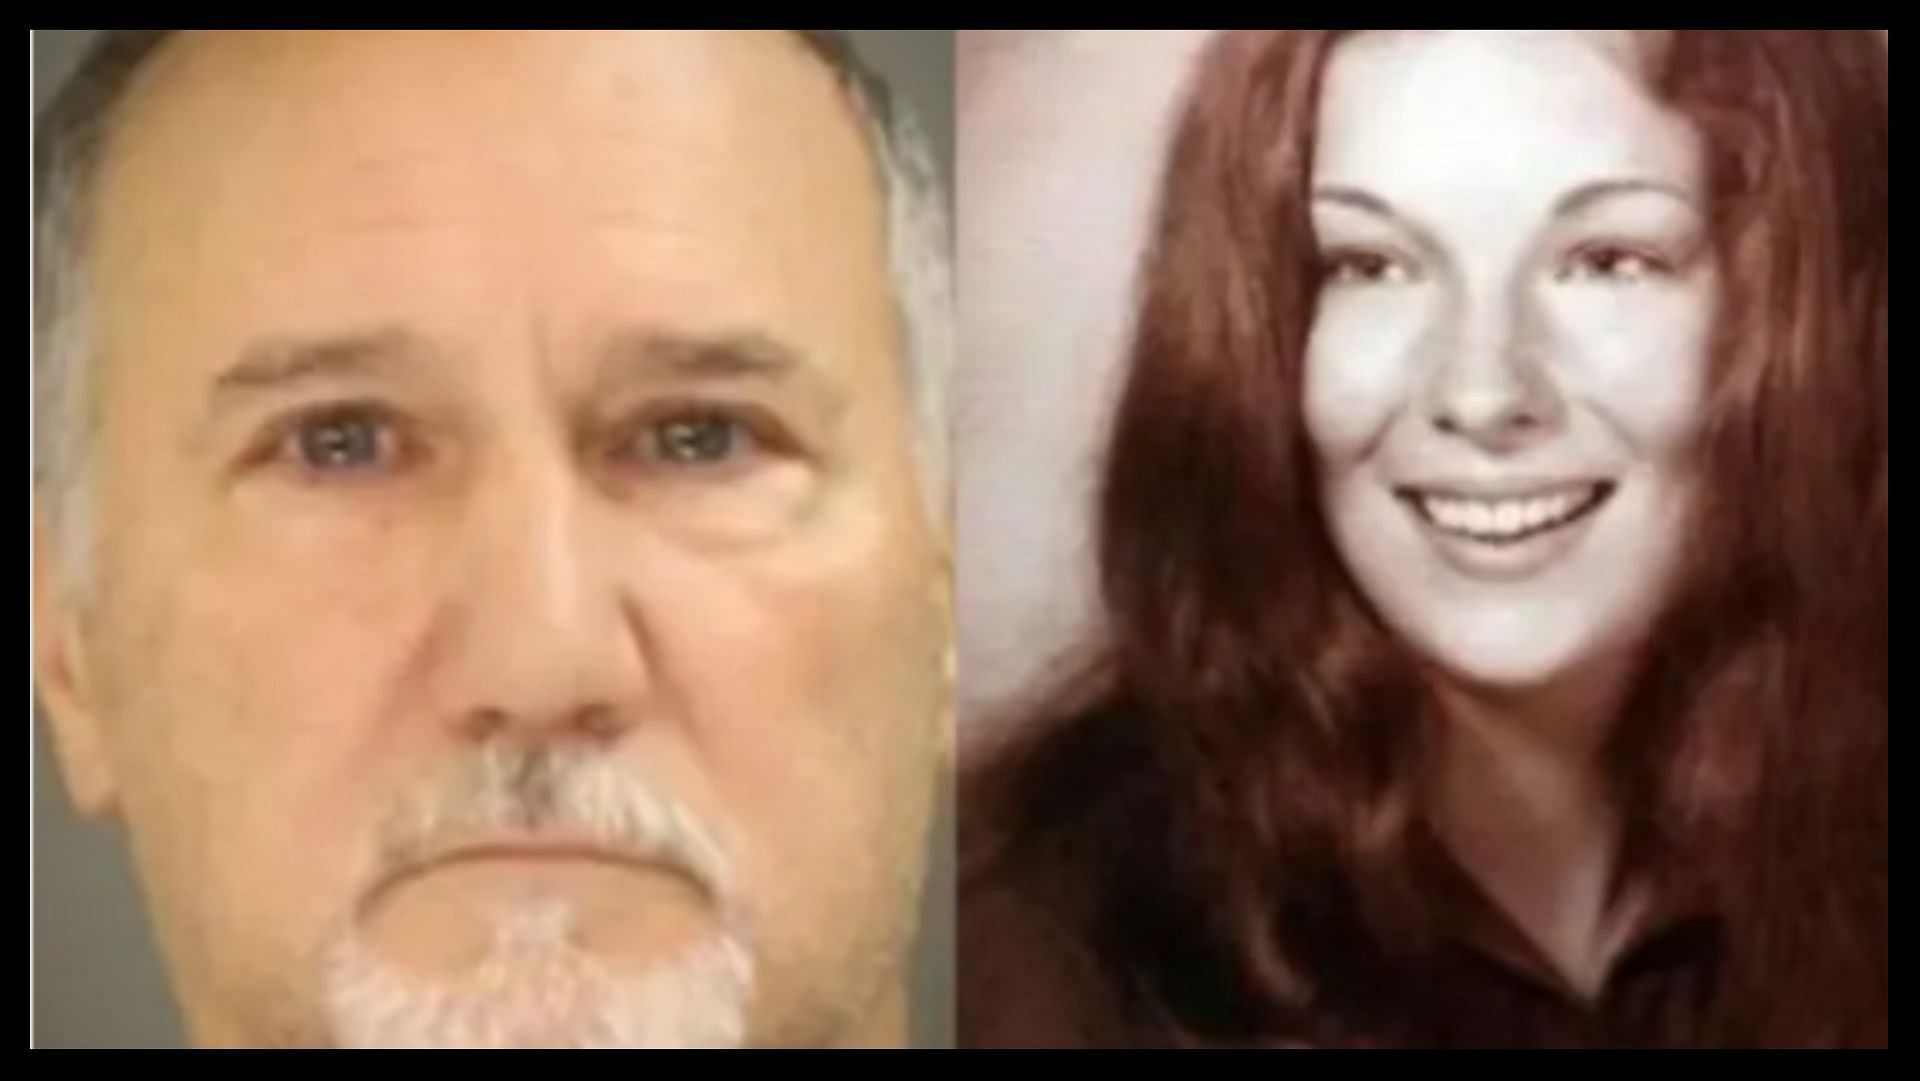 Alleged suspect David Sinopoli (left) and the 19-year-old victim Lindy Bicheler (right) who was s*xually abused and murdered in 1975 (Image via Twitter/TrueCrimeGuy)